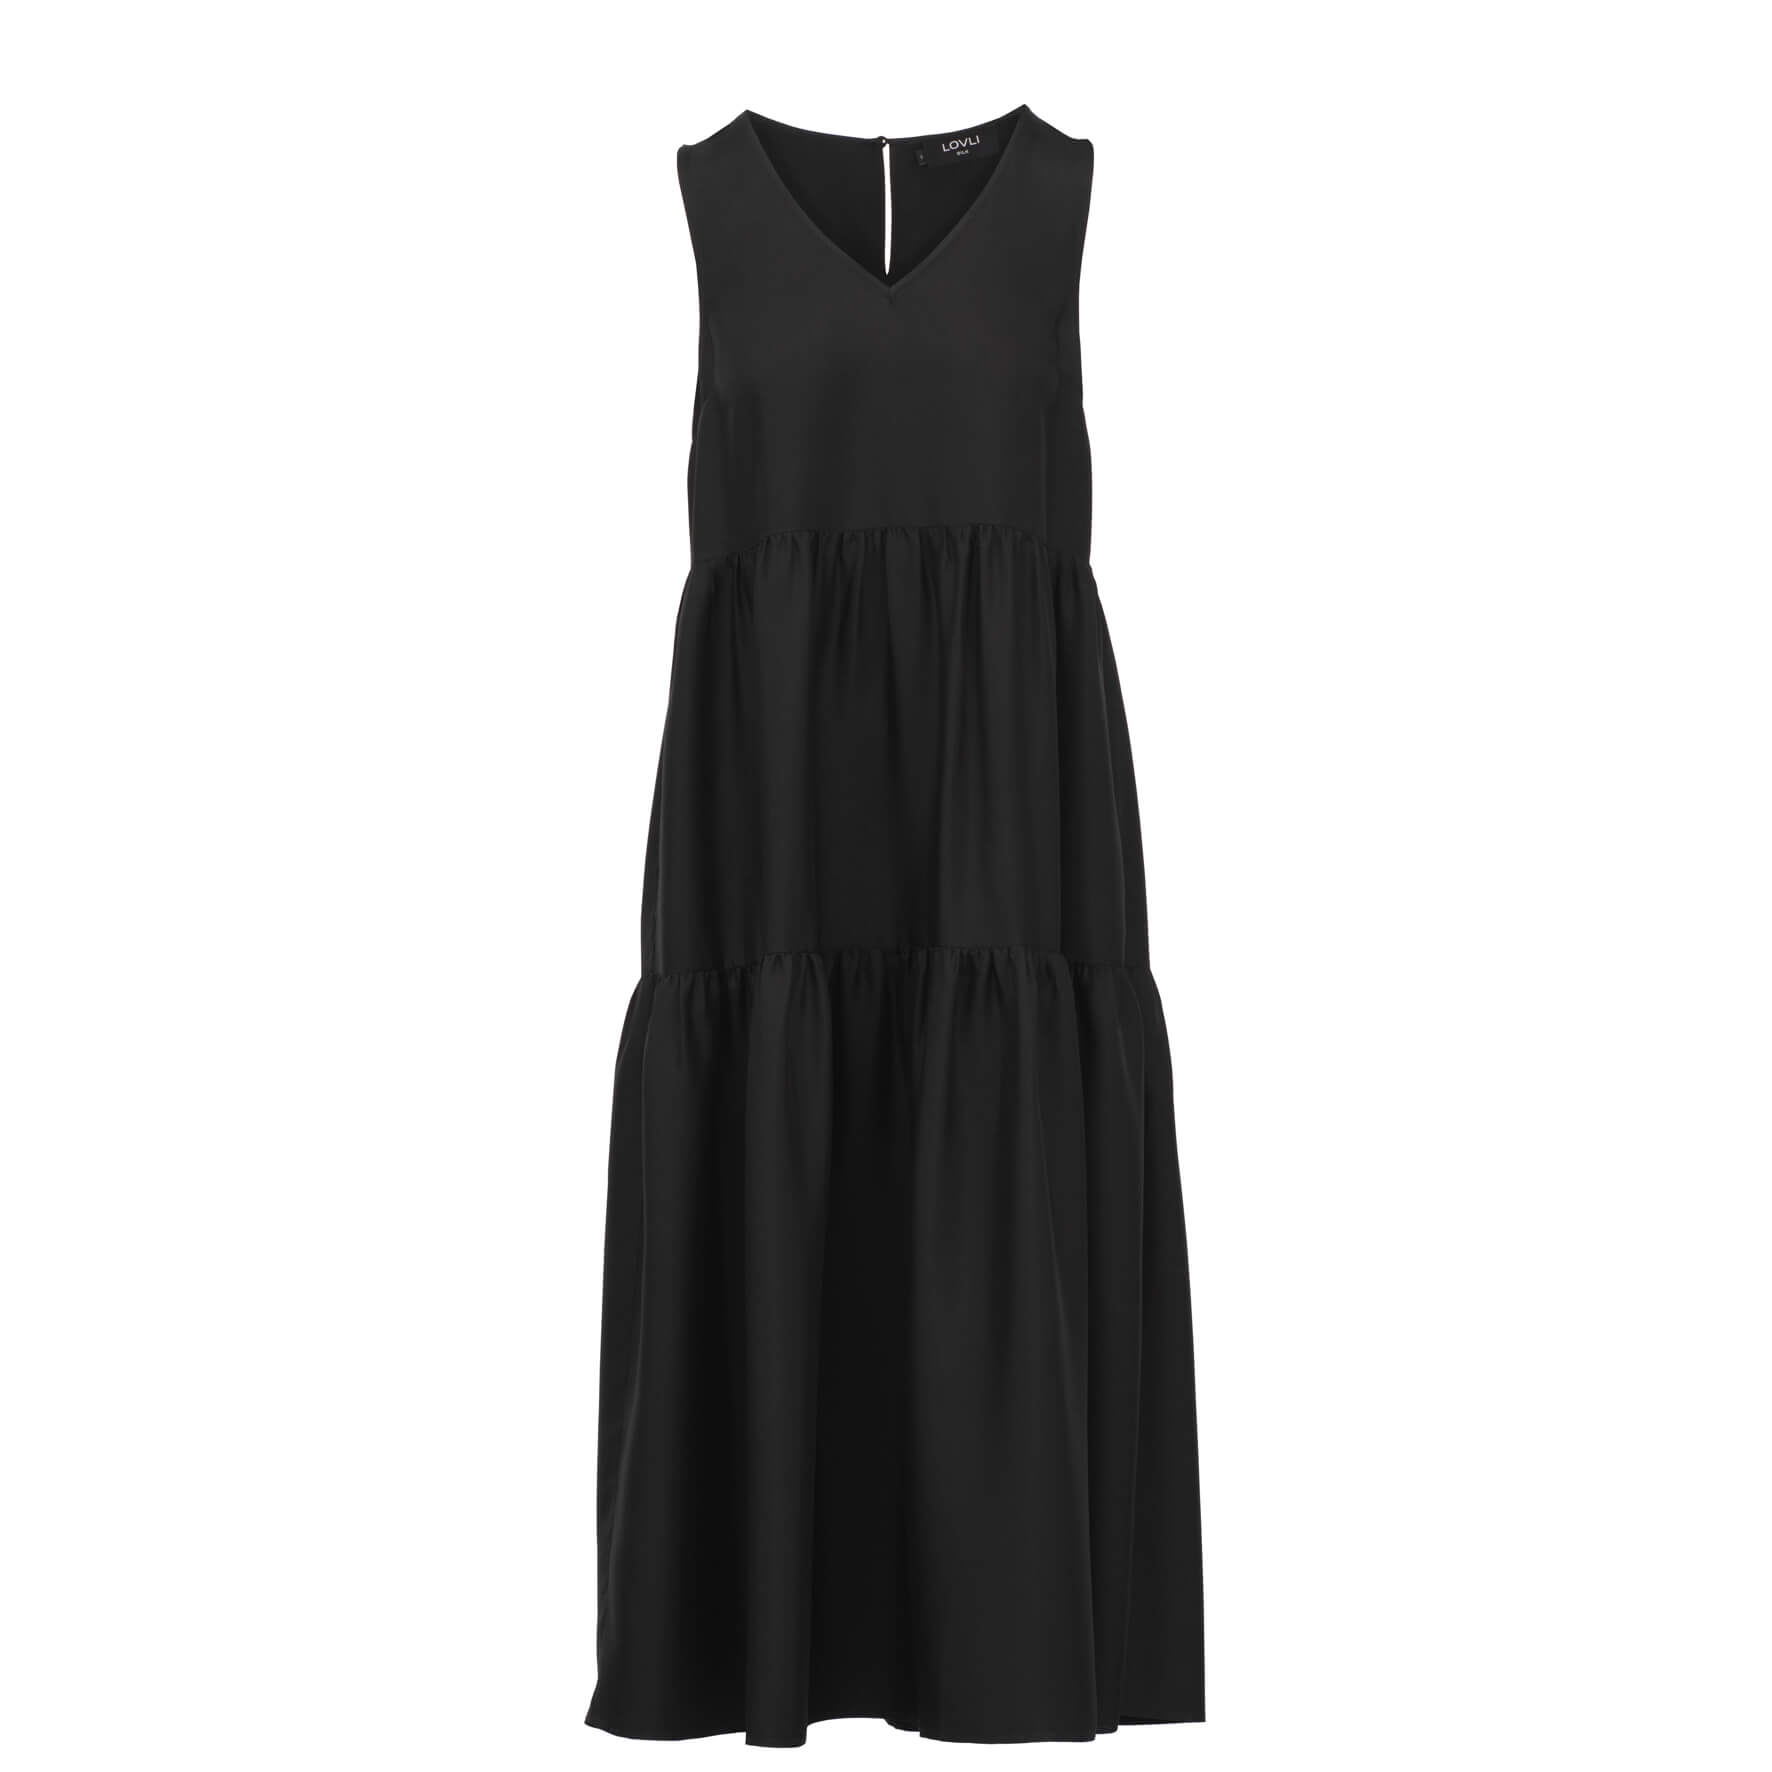 SILK DRESS WITH POCKETS IN BLACK